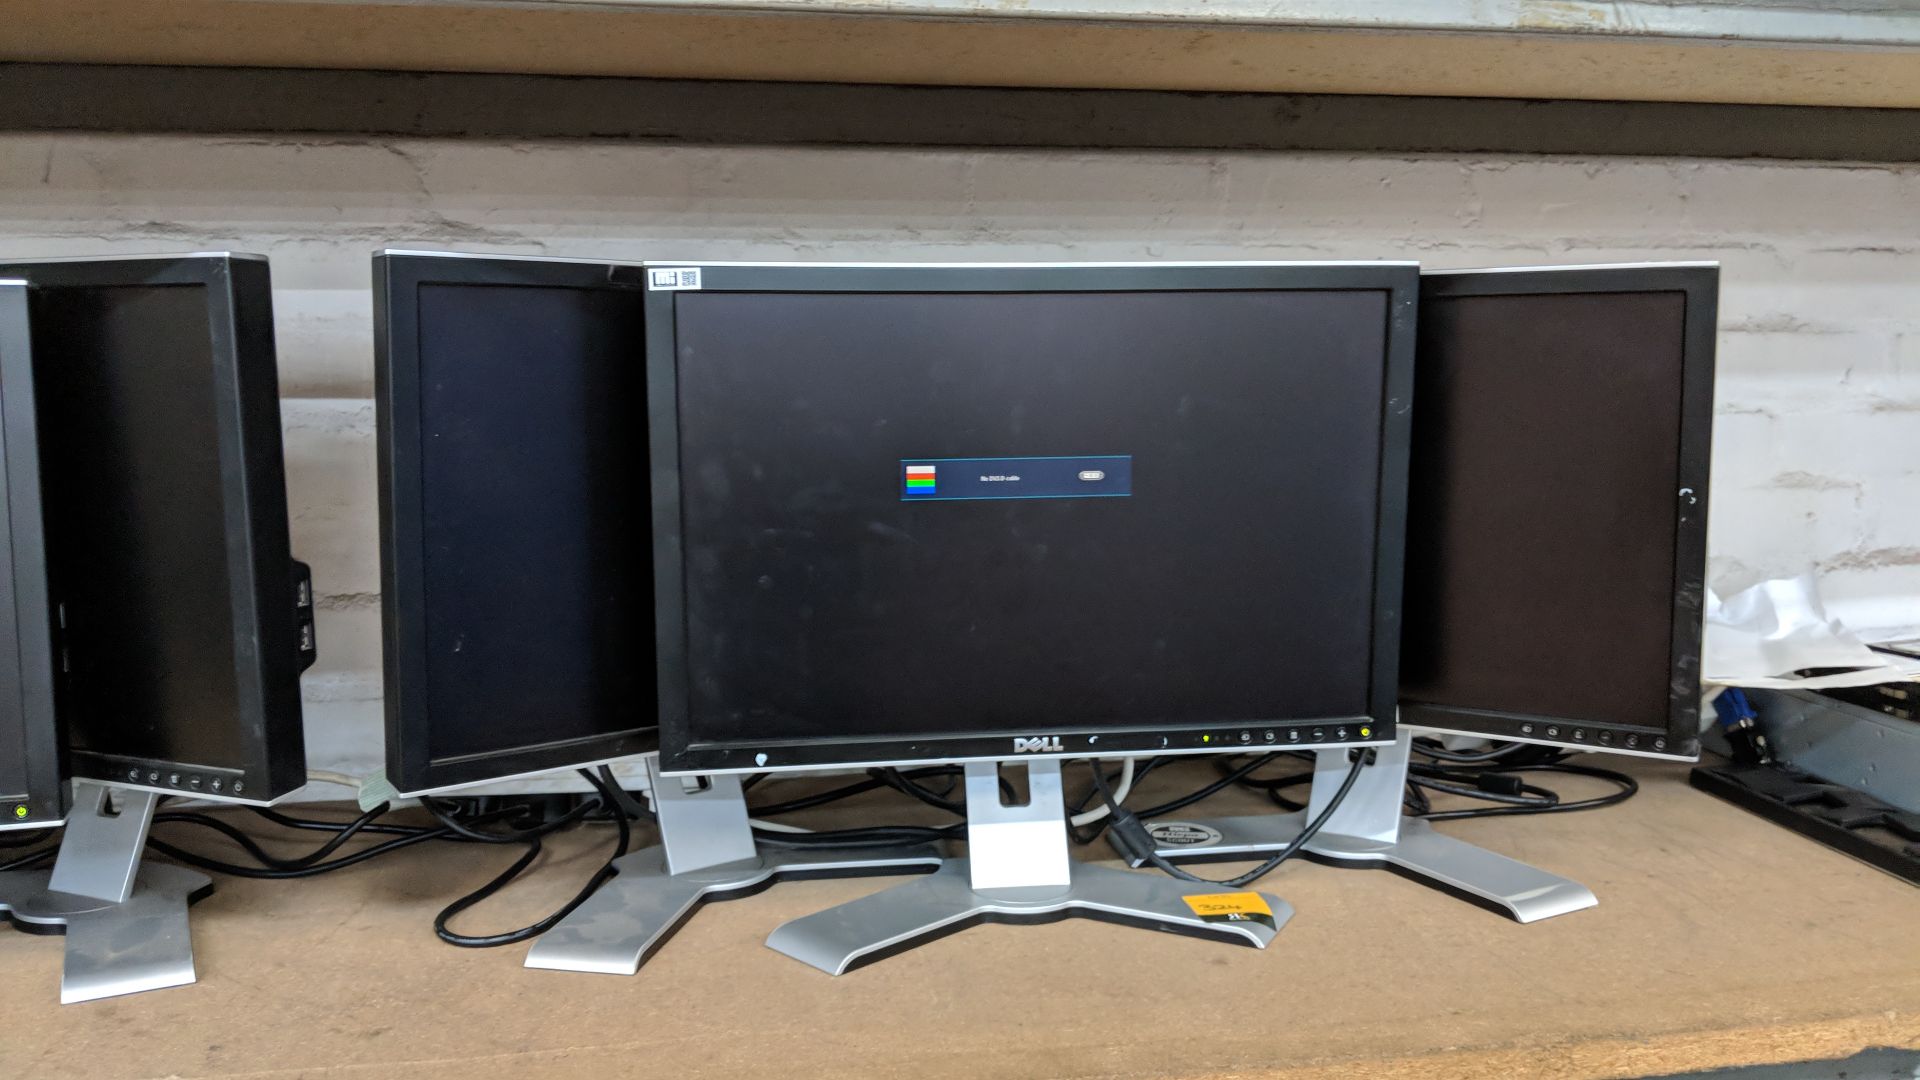 3 off Dell 20" widescreen LCD monitors IMPORTANT: Please remember goods successfully bid upon must